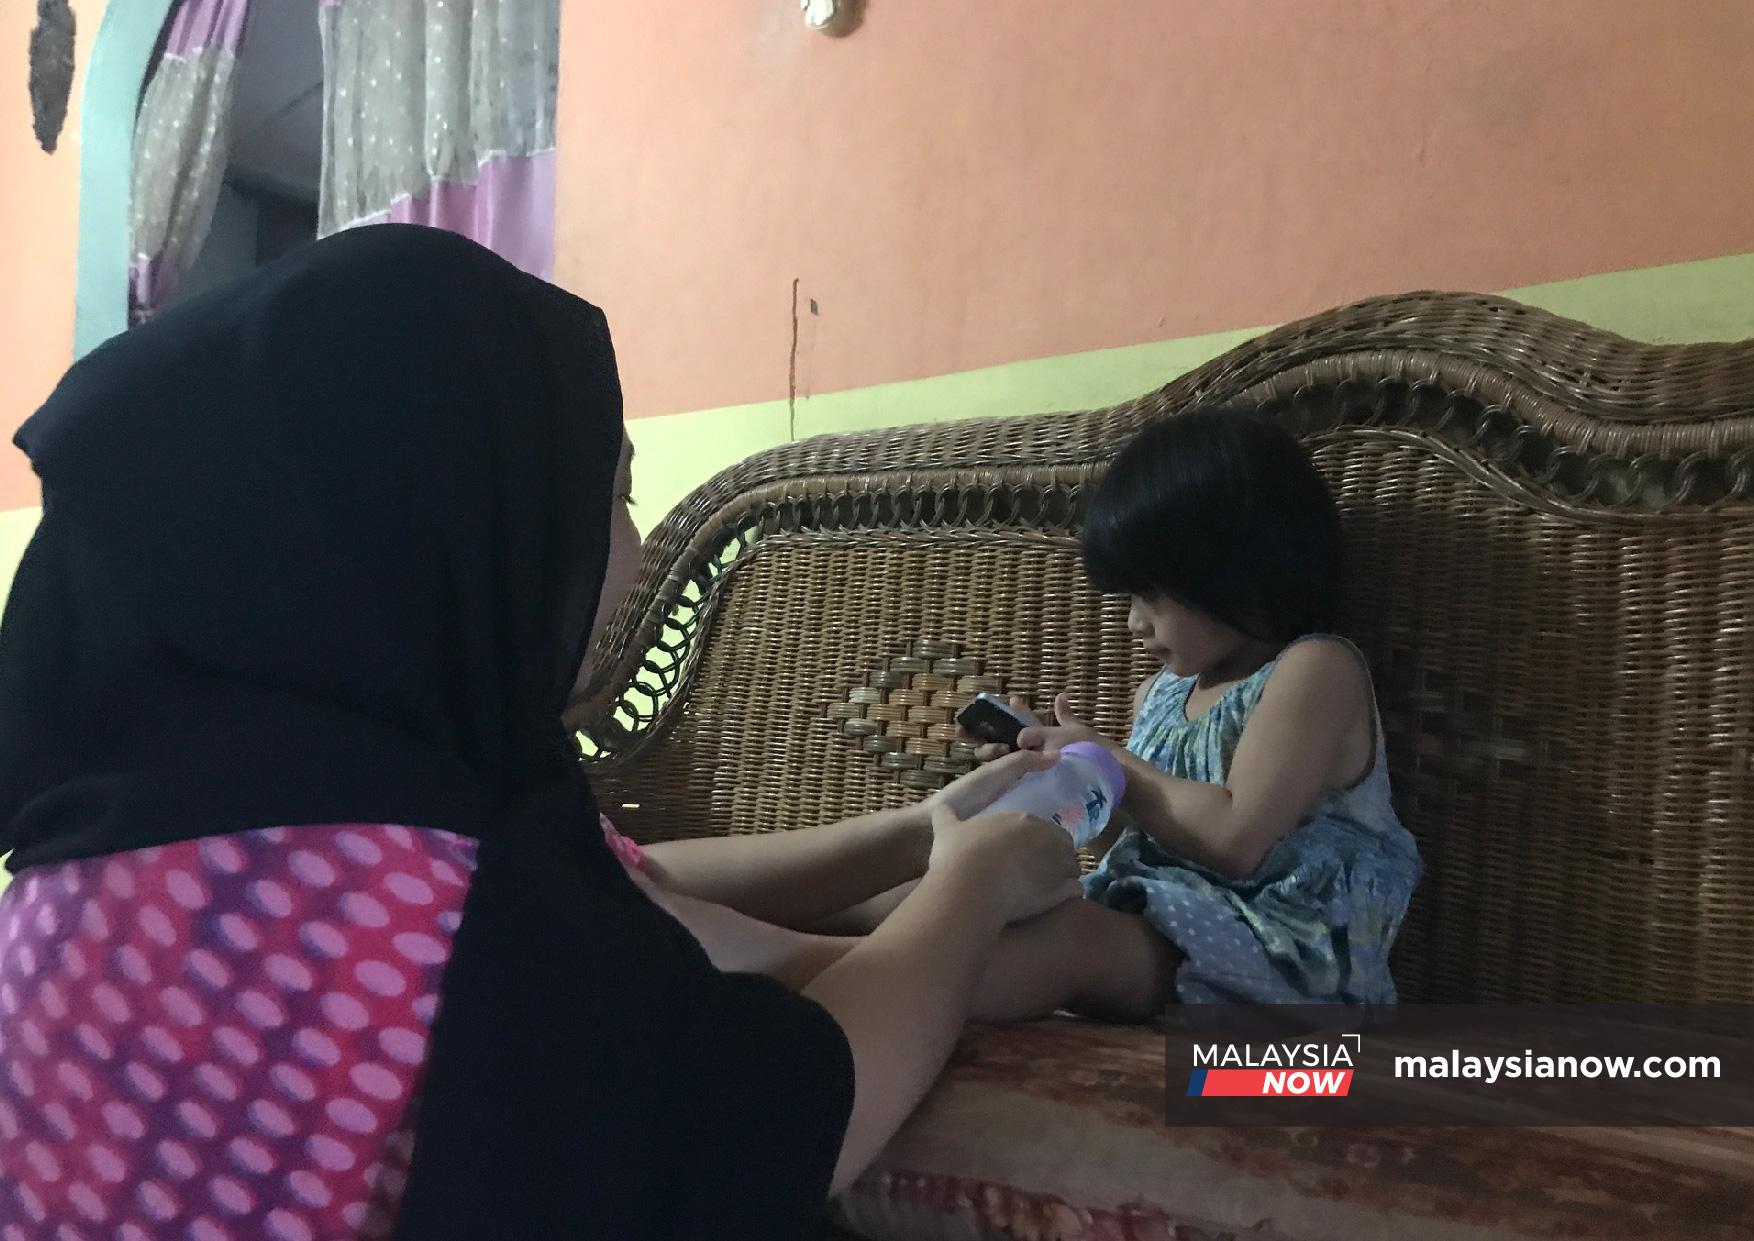 Nurul Fariha Abdullah holds a bottle of milk as she coaxes her four-year-old sister to drink.